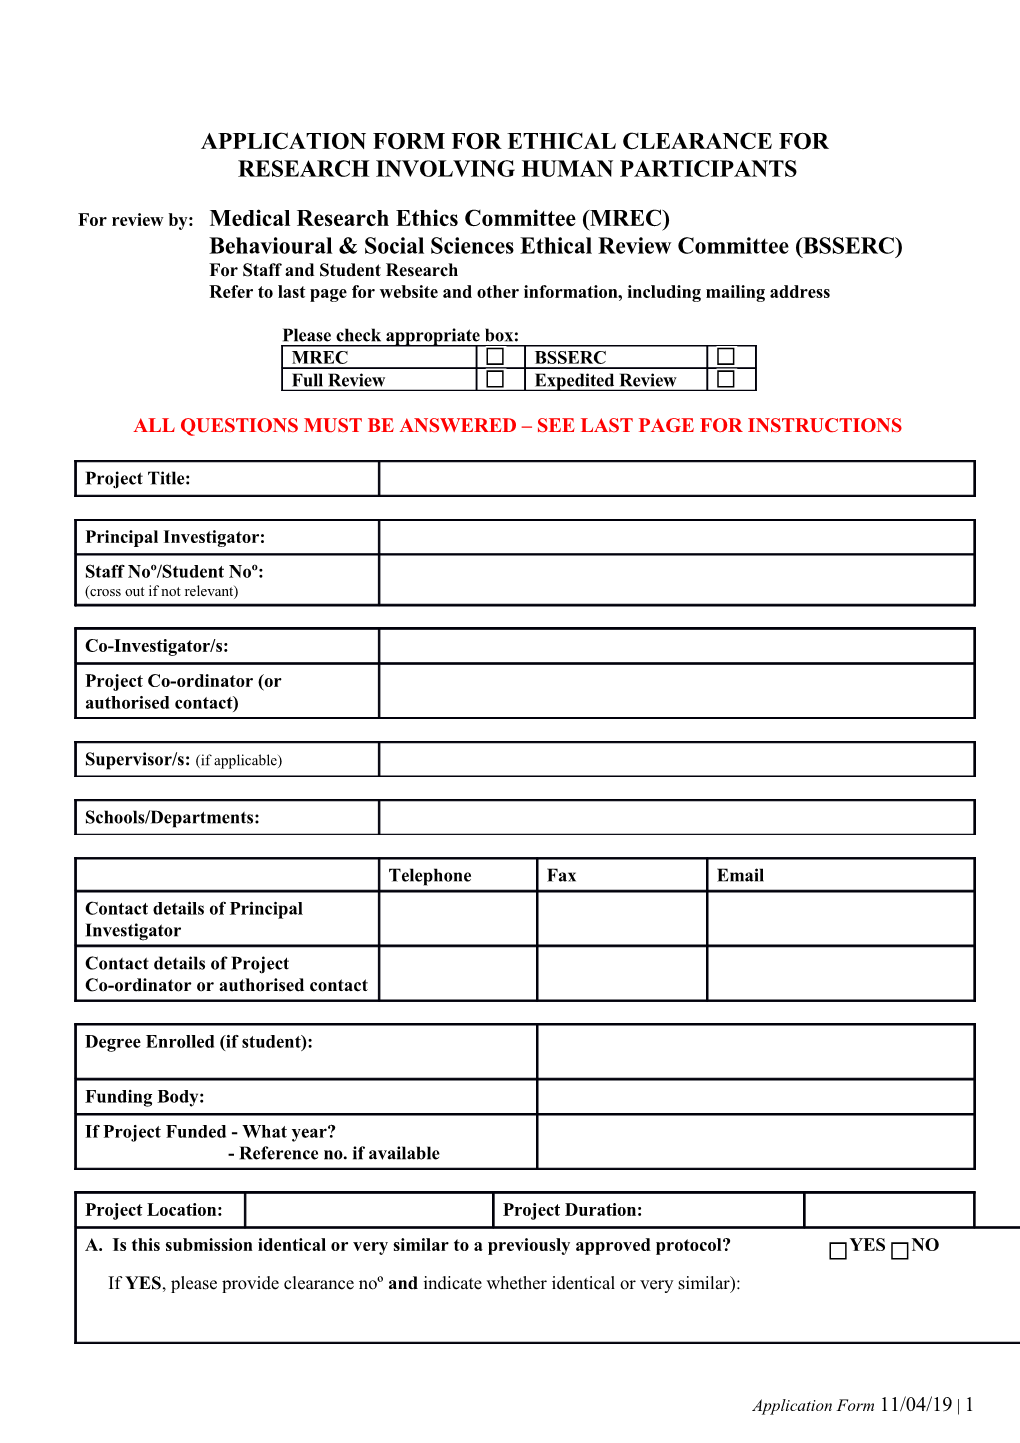 Application Form for Ethical Clearance For